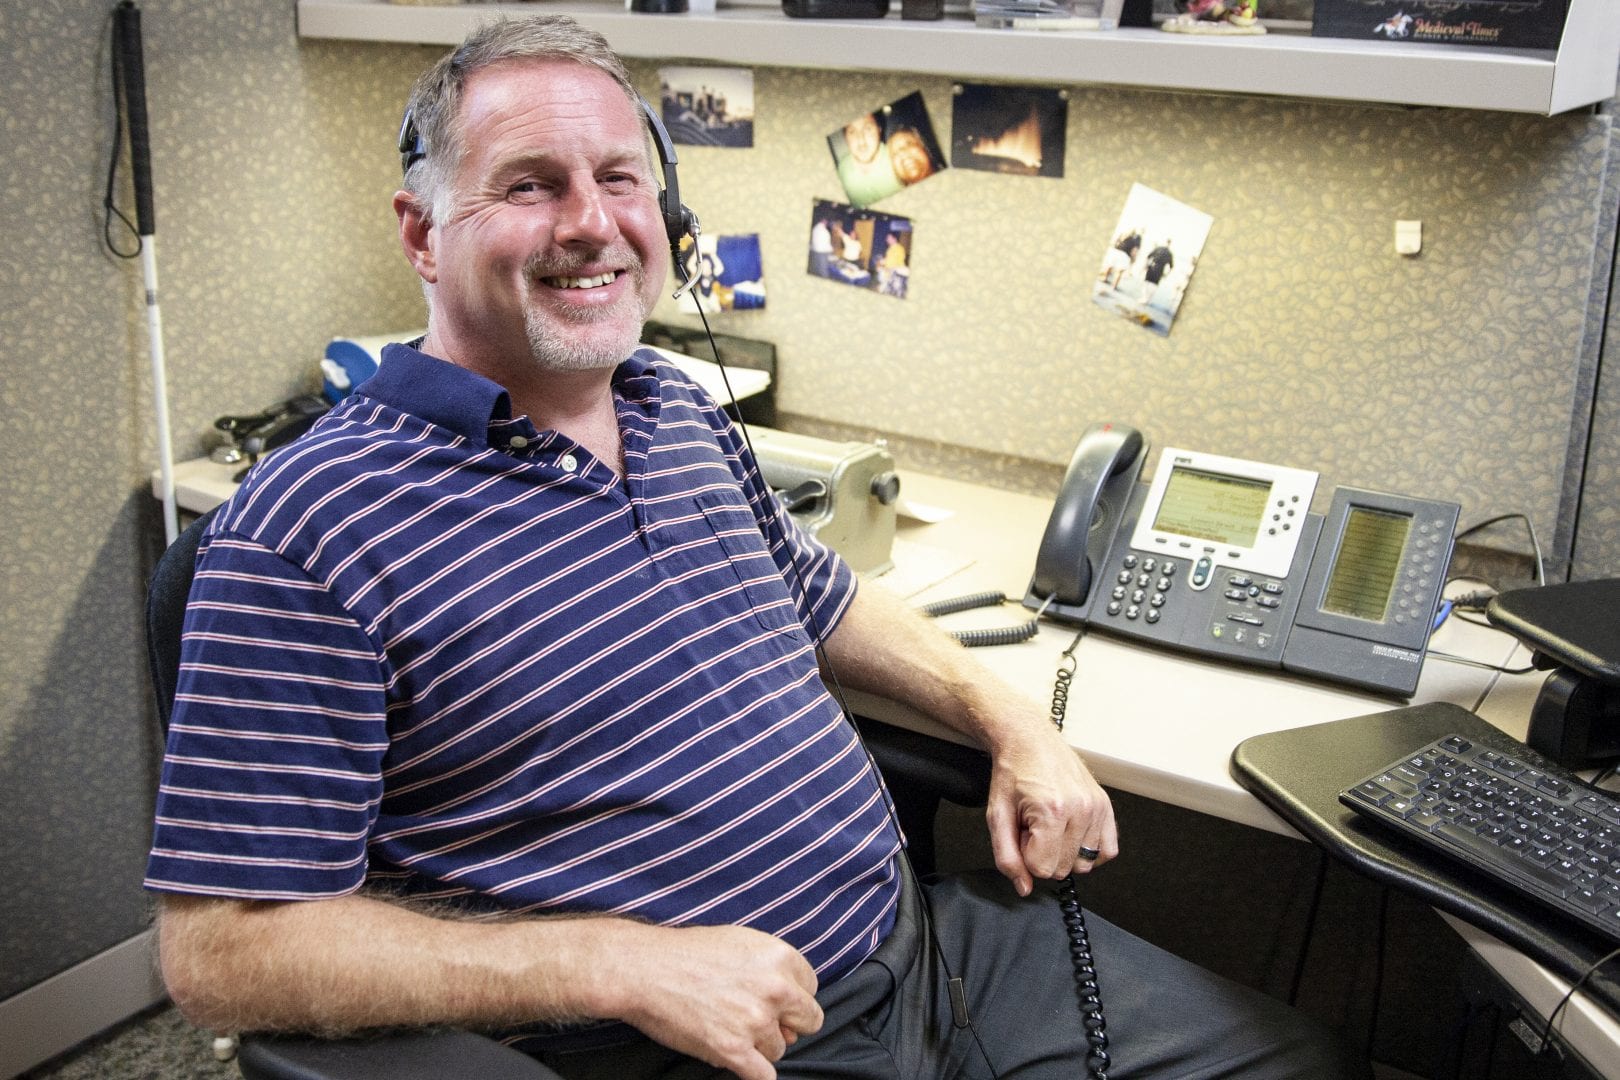 a man in a headset sitting at a desk smiling